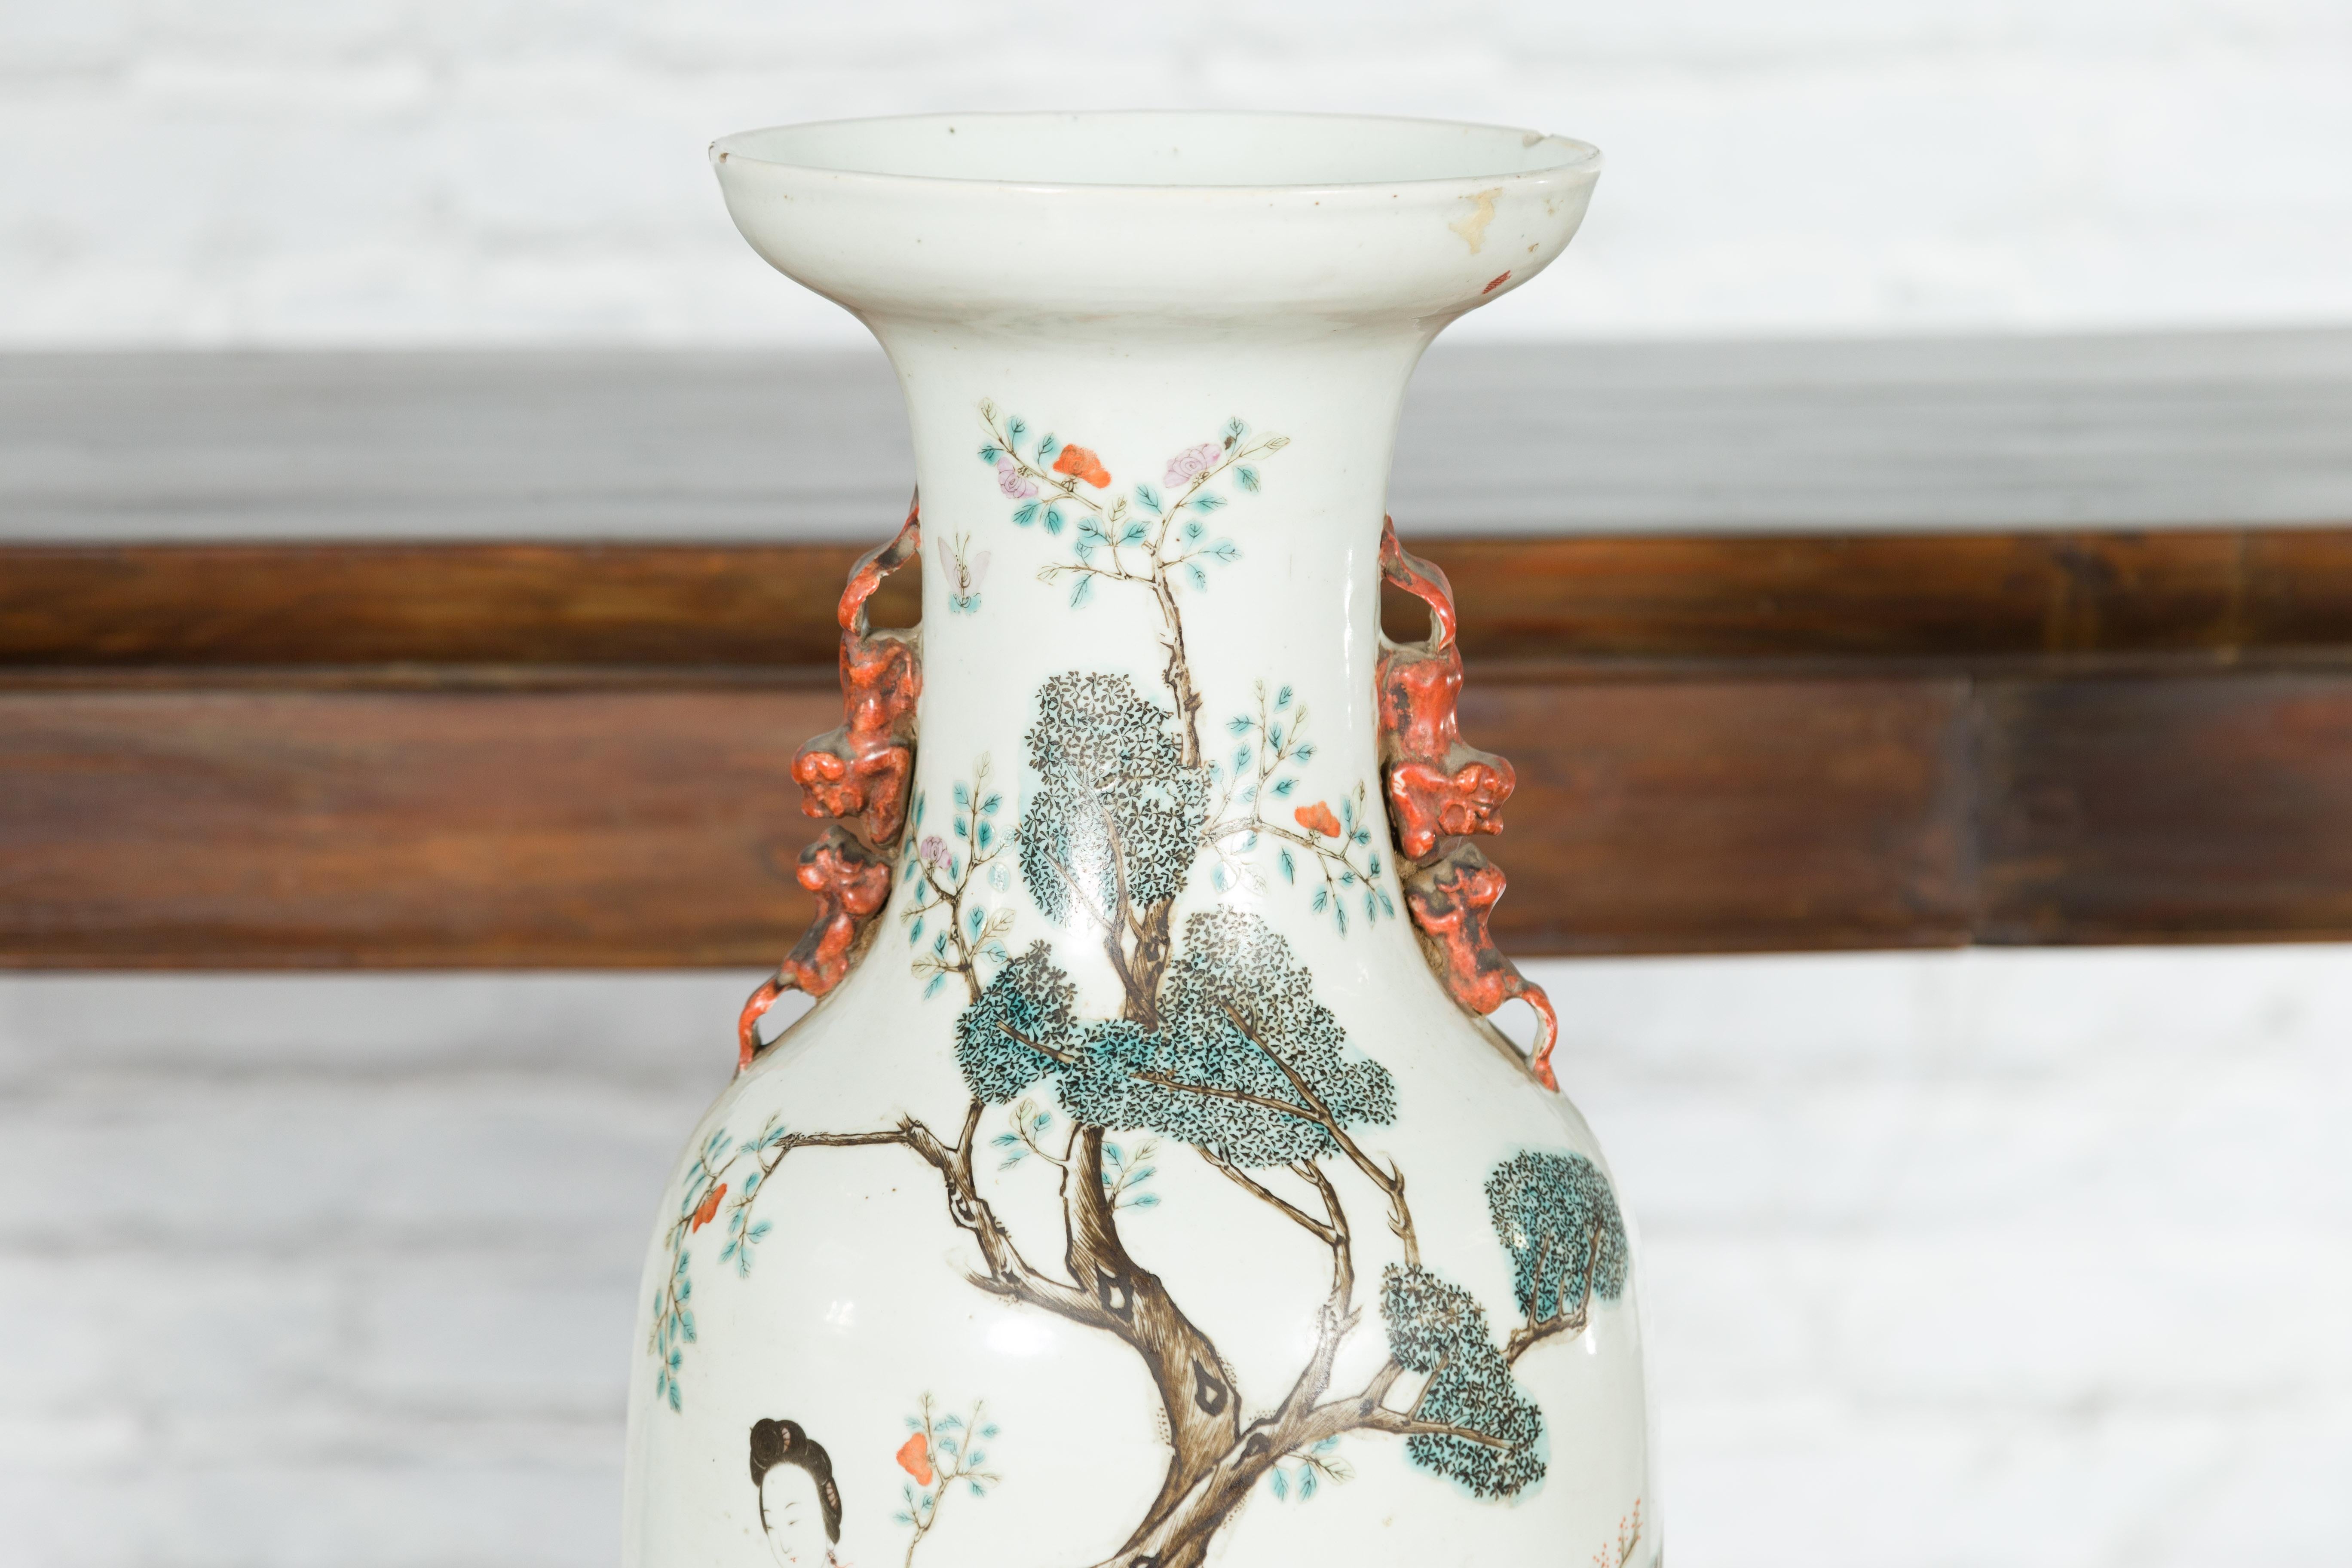 Chinese Qing Porcelain Vase with Hand-Painted Figures and Calligraphy Motifs For Sale 1